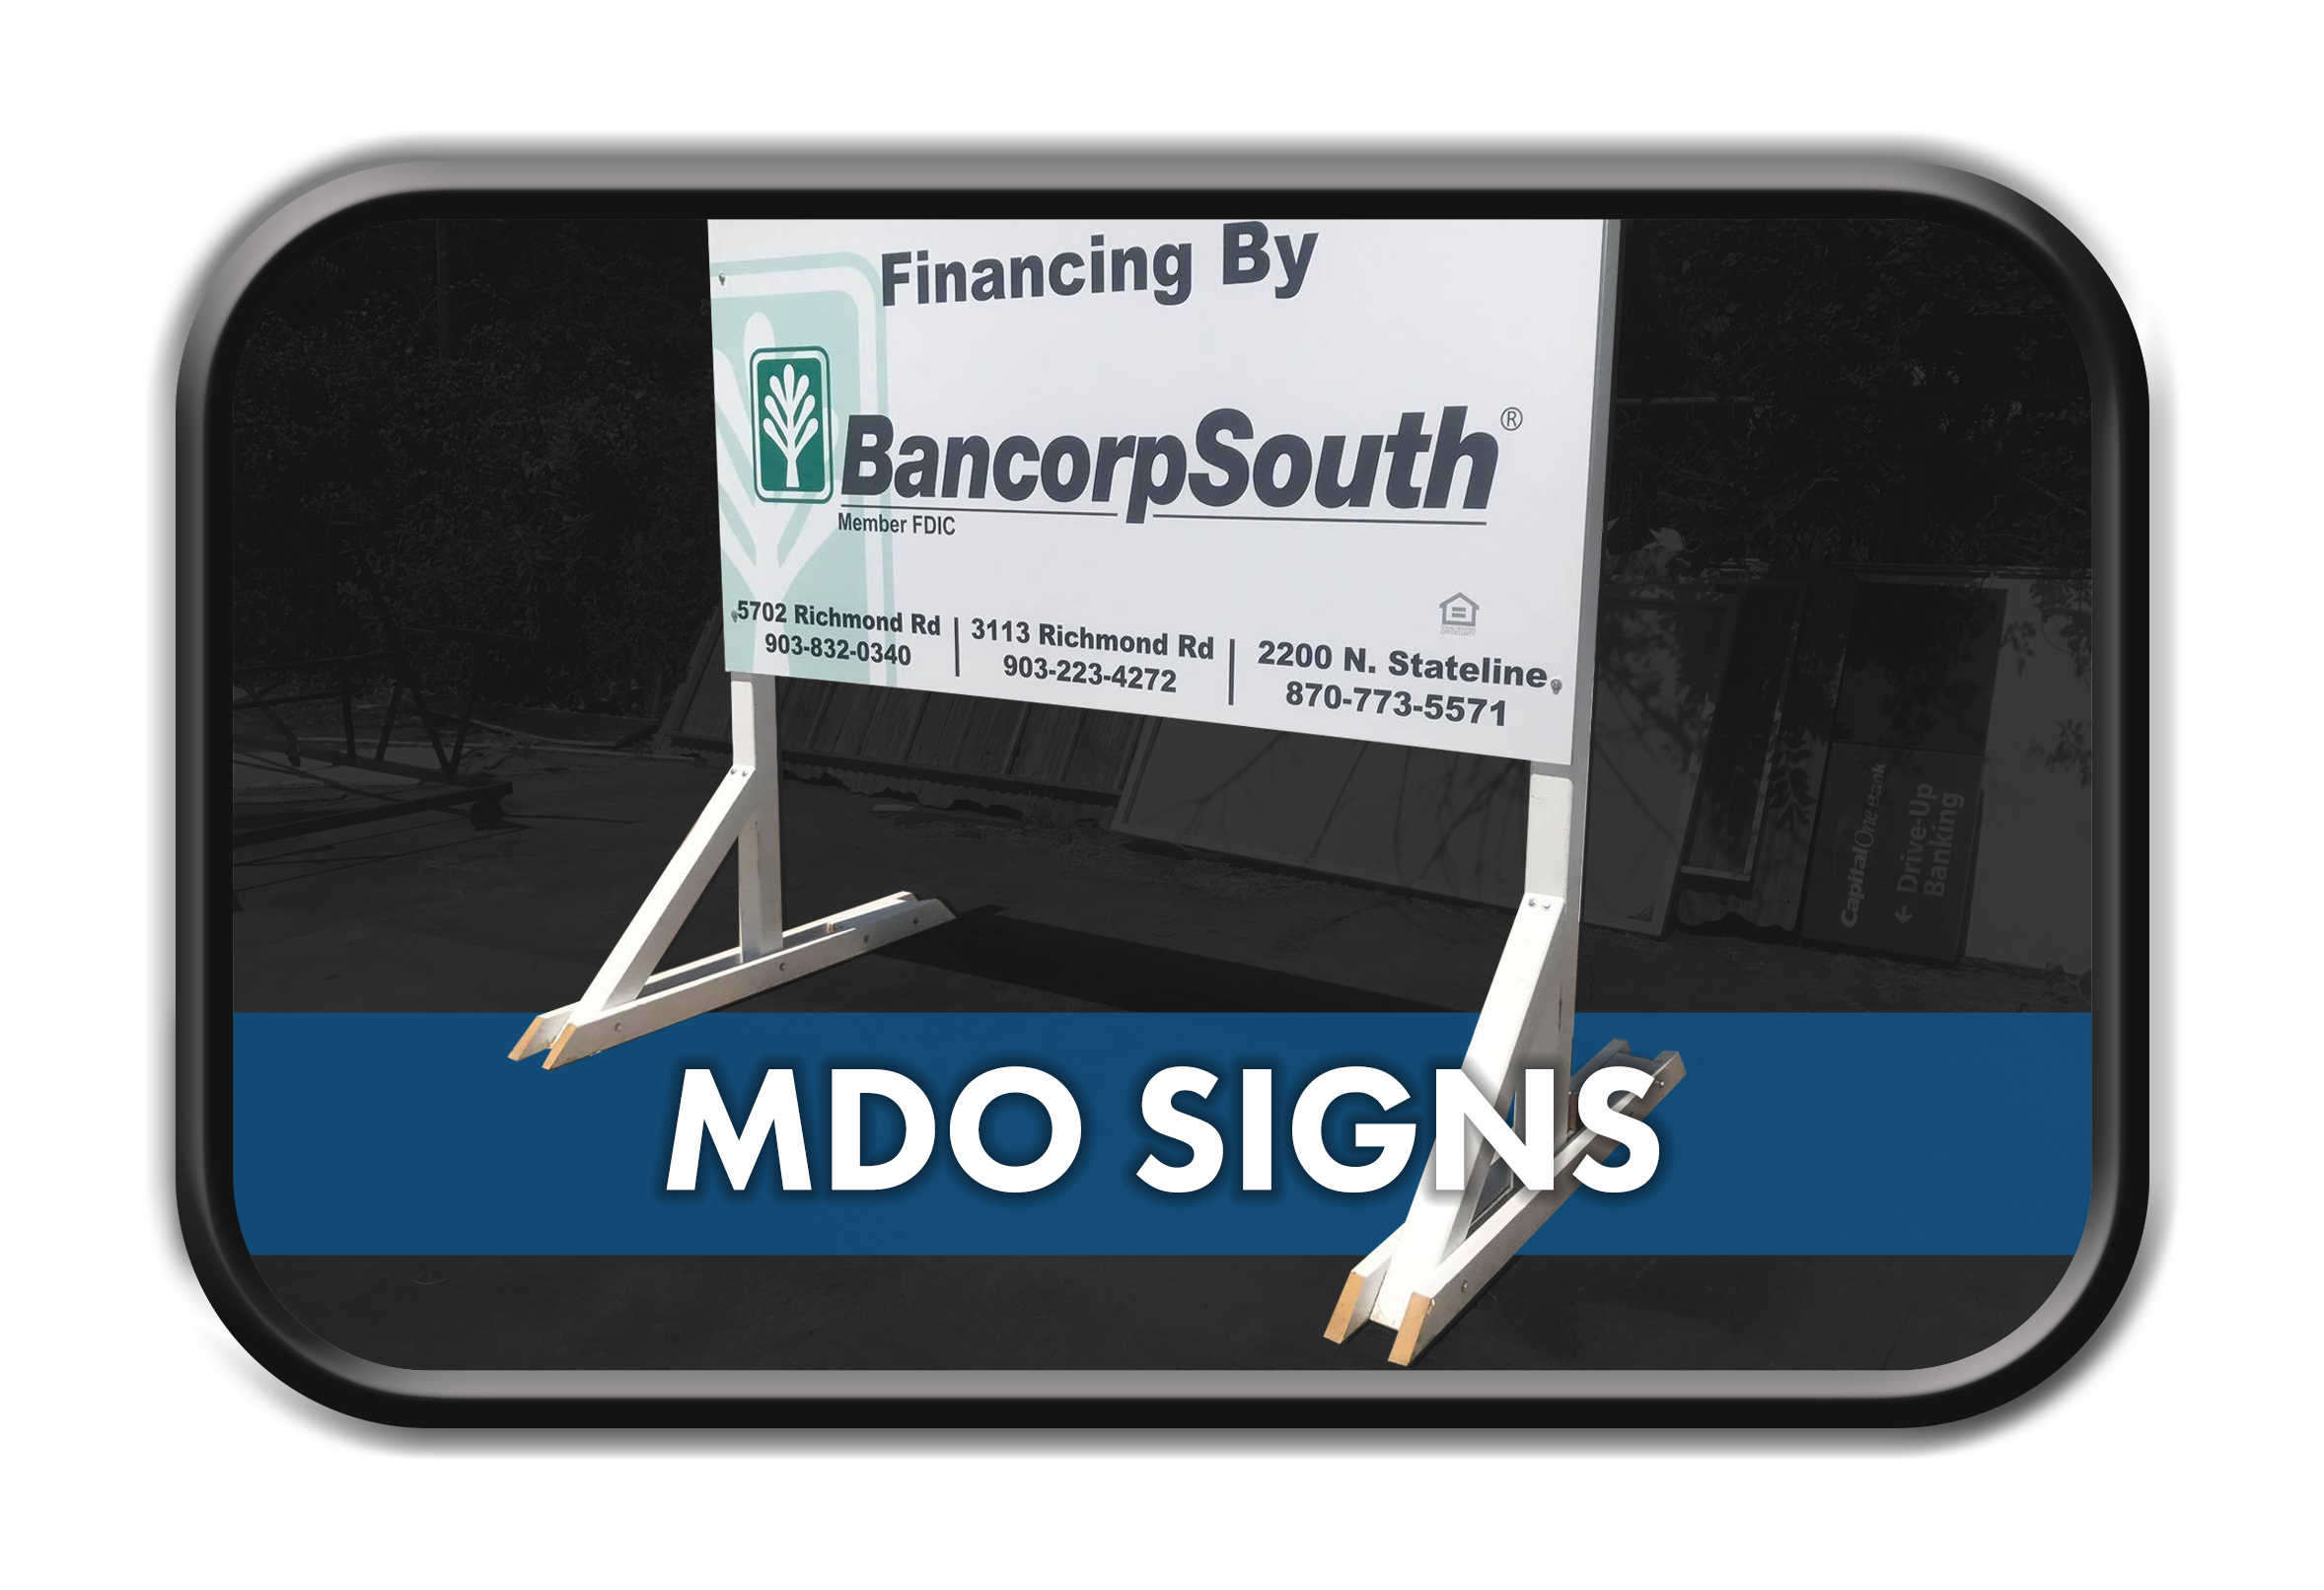 MDO SIGNS-ALSOCHECKOUT.png